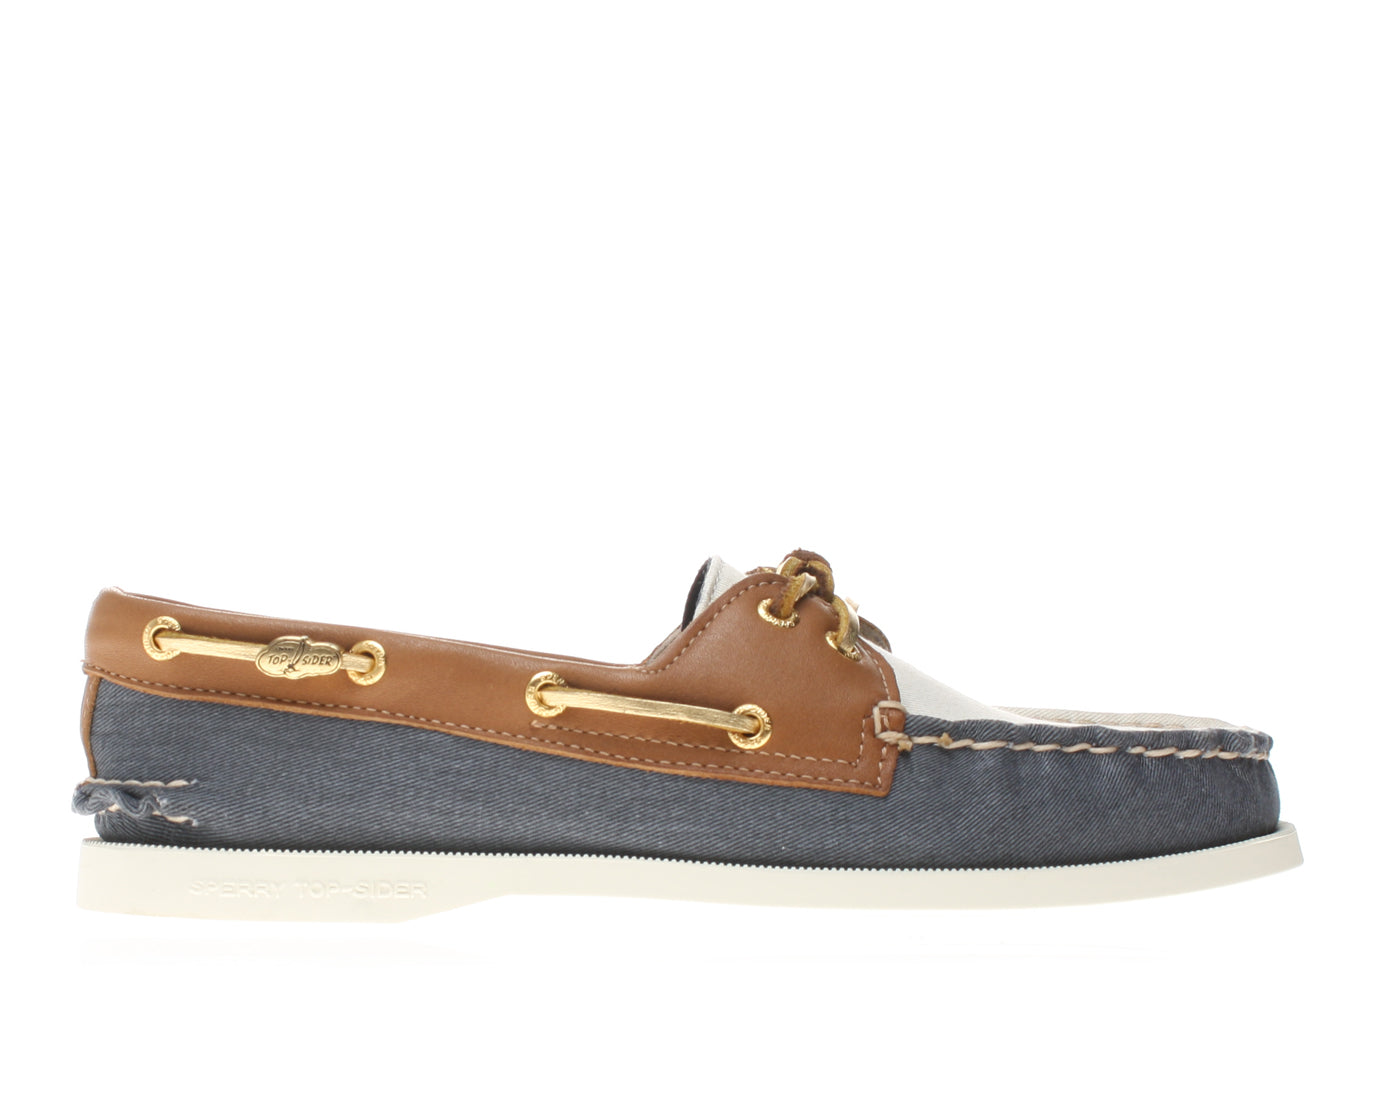 Sperry Top Sider Cloud Logo Women's Boat Shoes